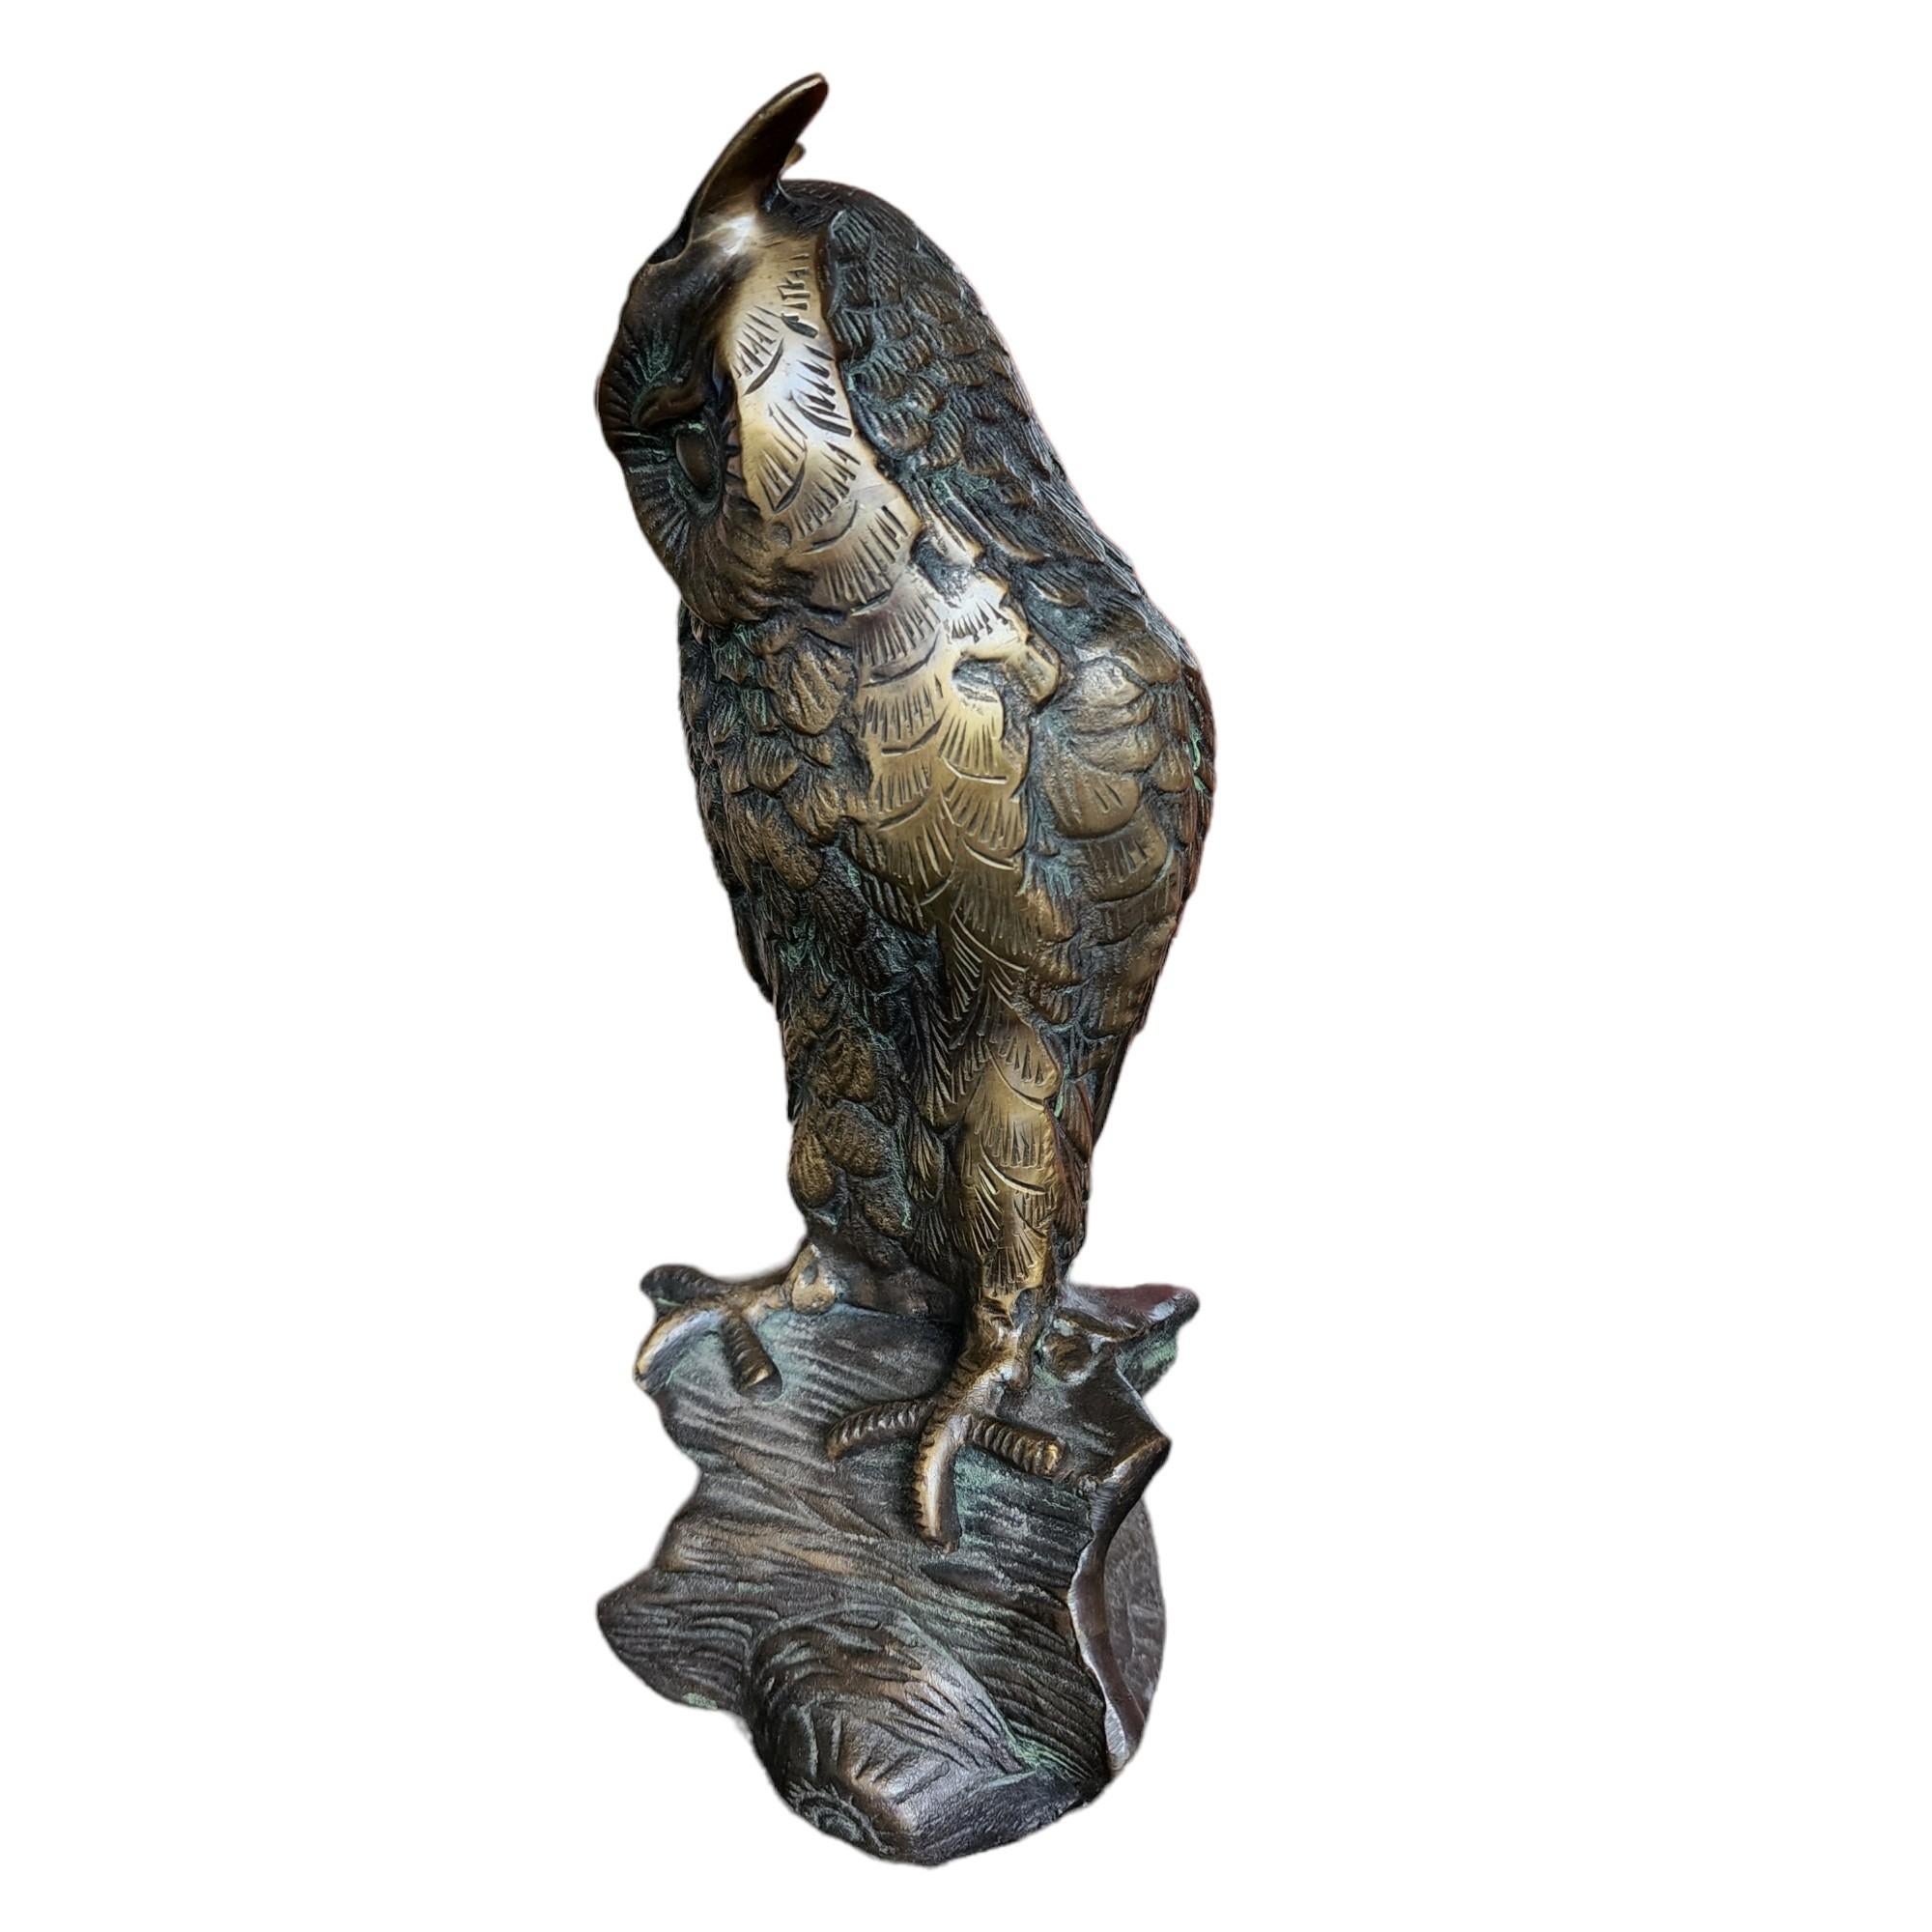 Finest example of a figural owl sculpture, made of brass, 10 in tall and features a beautifully cast owl sitting on a branch.

Tags Marks Hallmarks: NA
Pattern:  Owl
Material:    Brass
Type or Style: Sculpture
Crafted In: USA
Circa: 1900's
Item